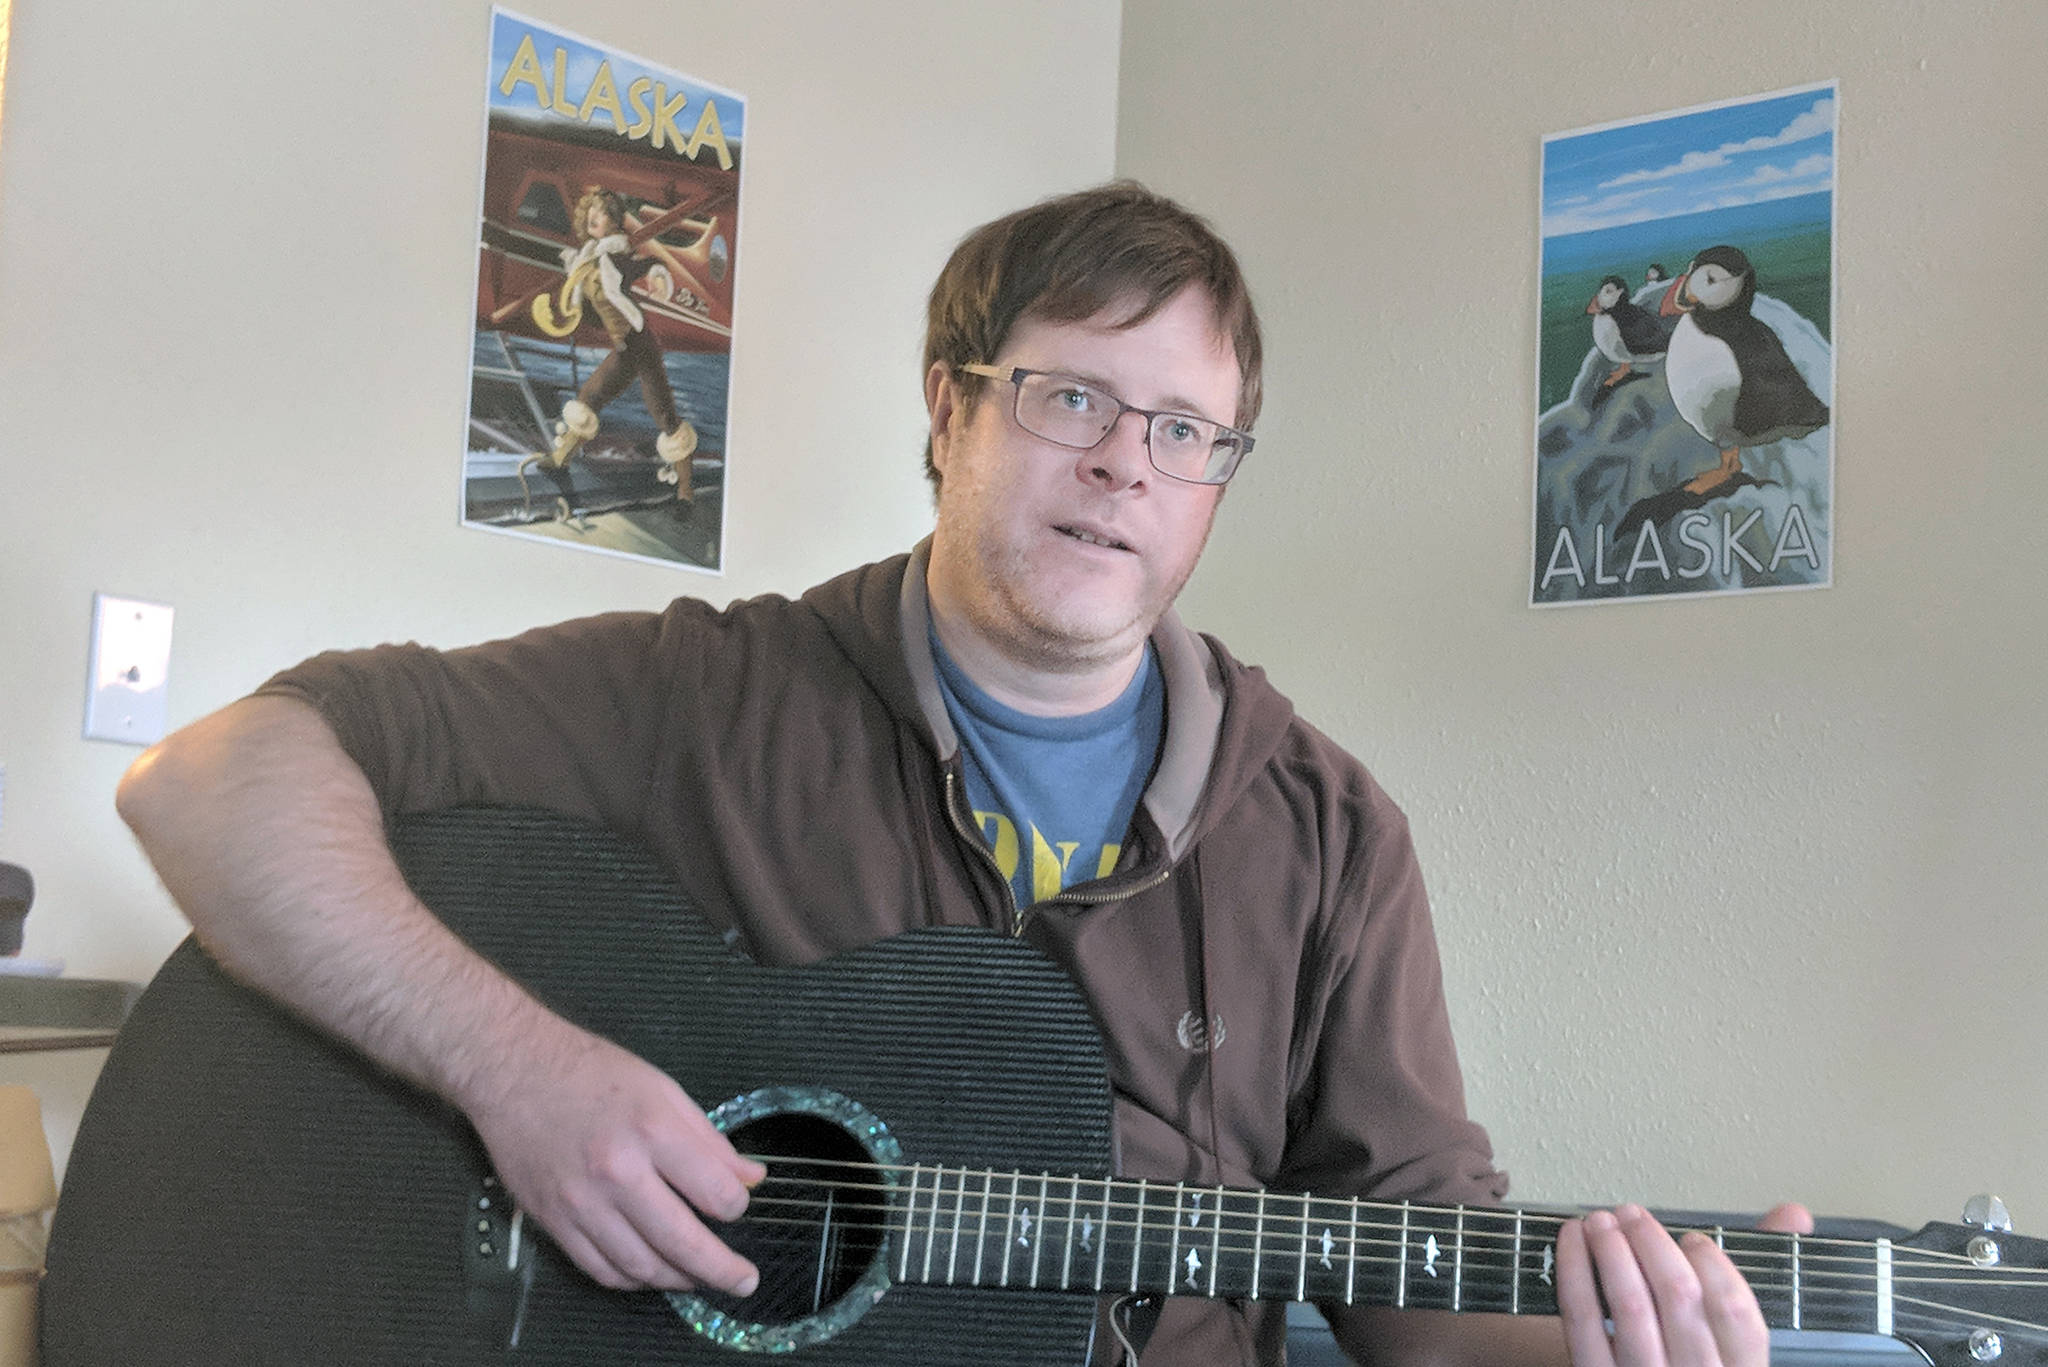 Andy Miller, a Juneau musician, released an album of 28 songs about Alaska titled, “Alaska in 28 Songs.” The project started with a goal of writing 49 songs for the 49th state, but Miller fatigue set in, and he released the project as a a pay-what-you-want Bandcamp album. (Ben Hohenstatt | Capital City Weekly)